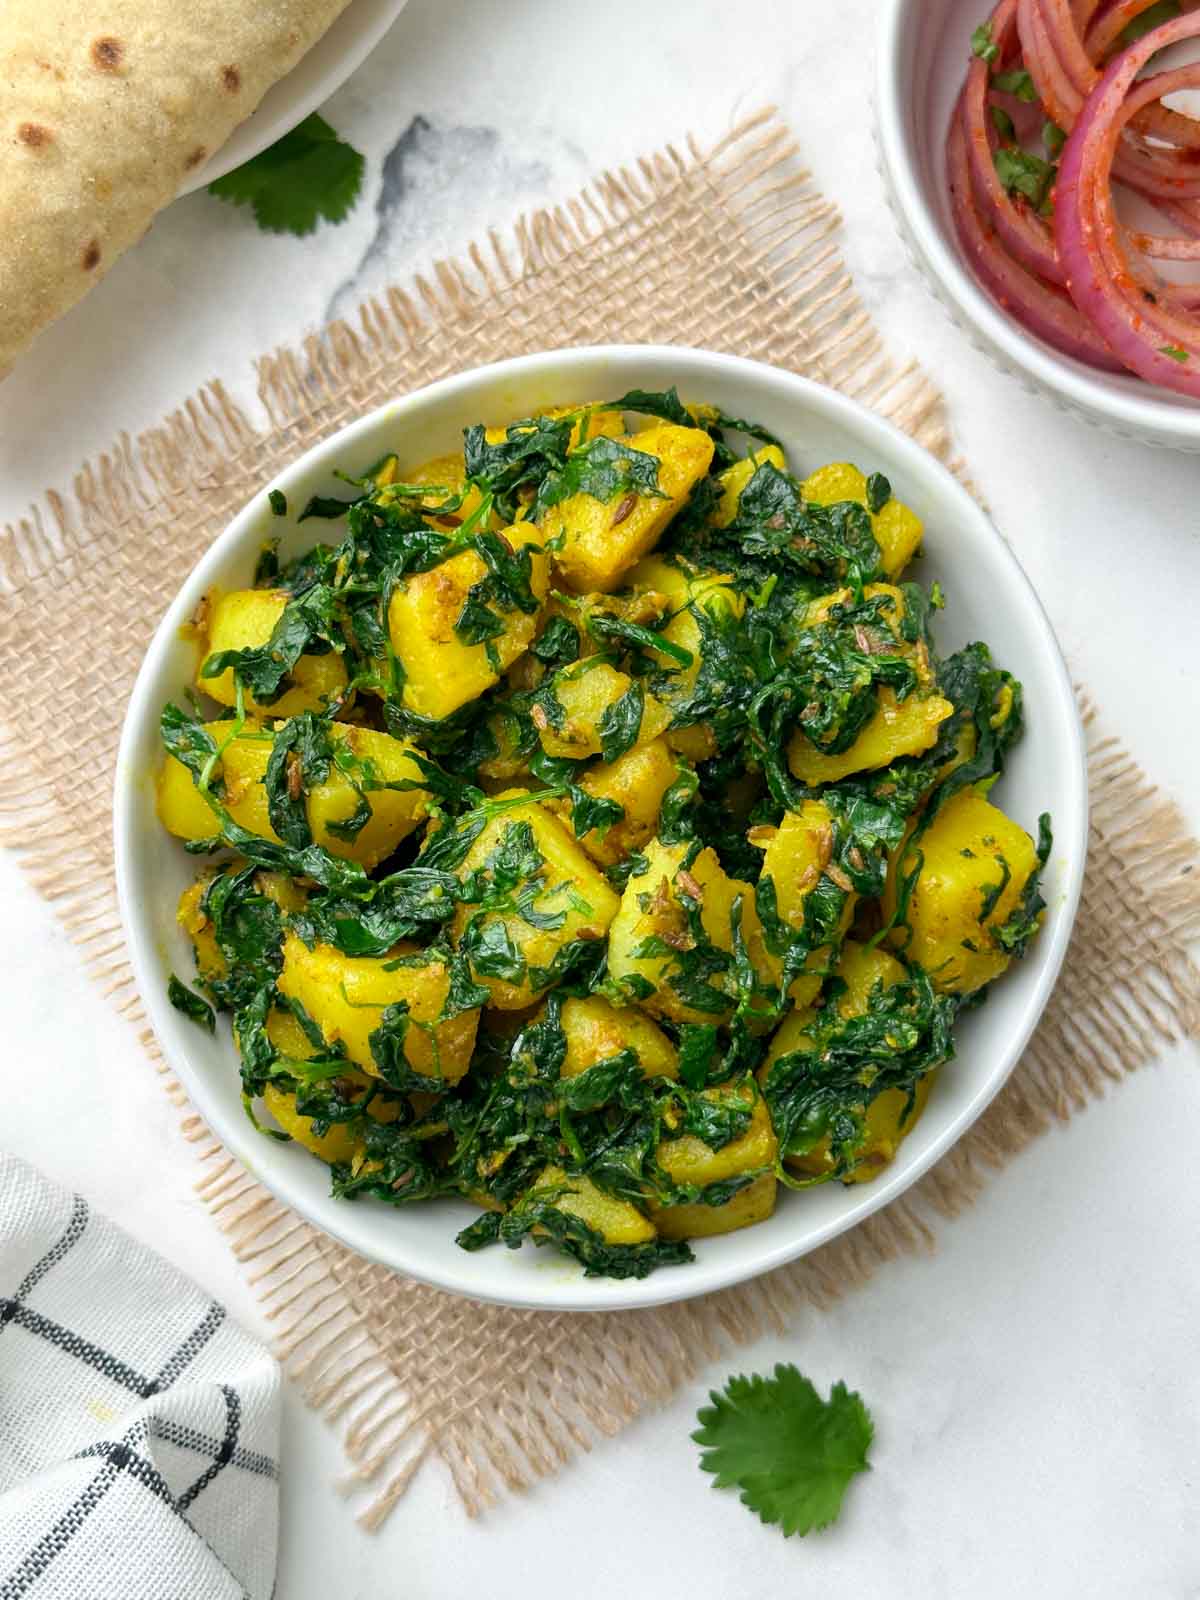 aloo methi sabzi served in a bowl with chapati and onion salad on the side